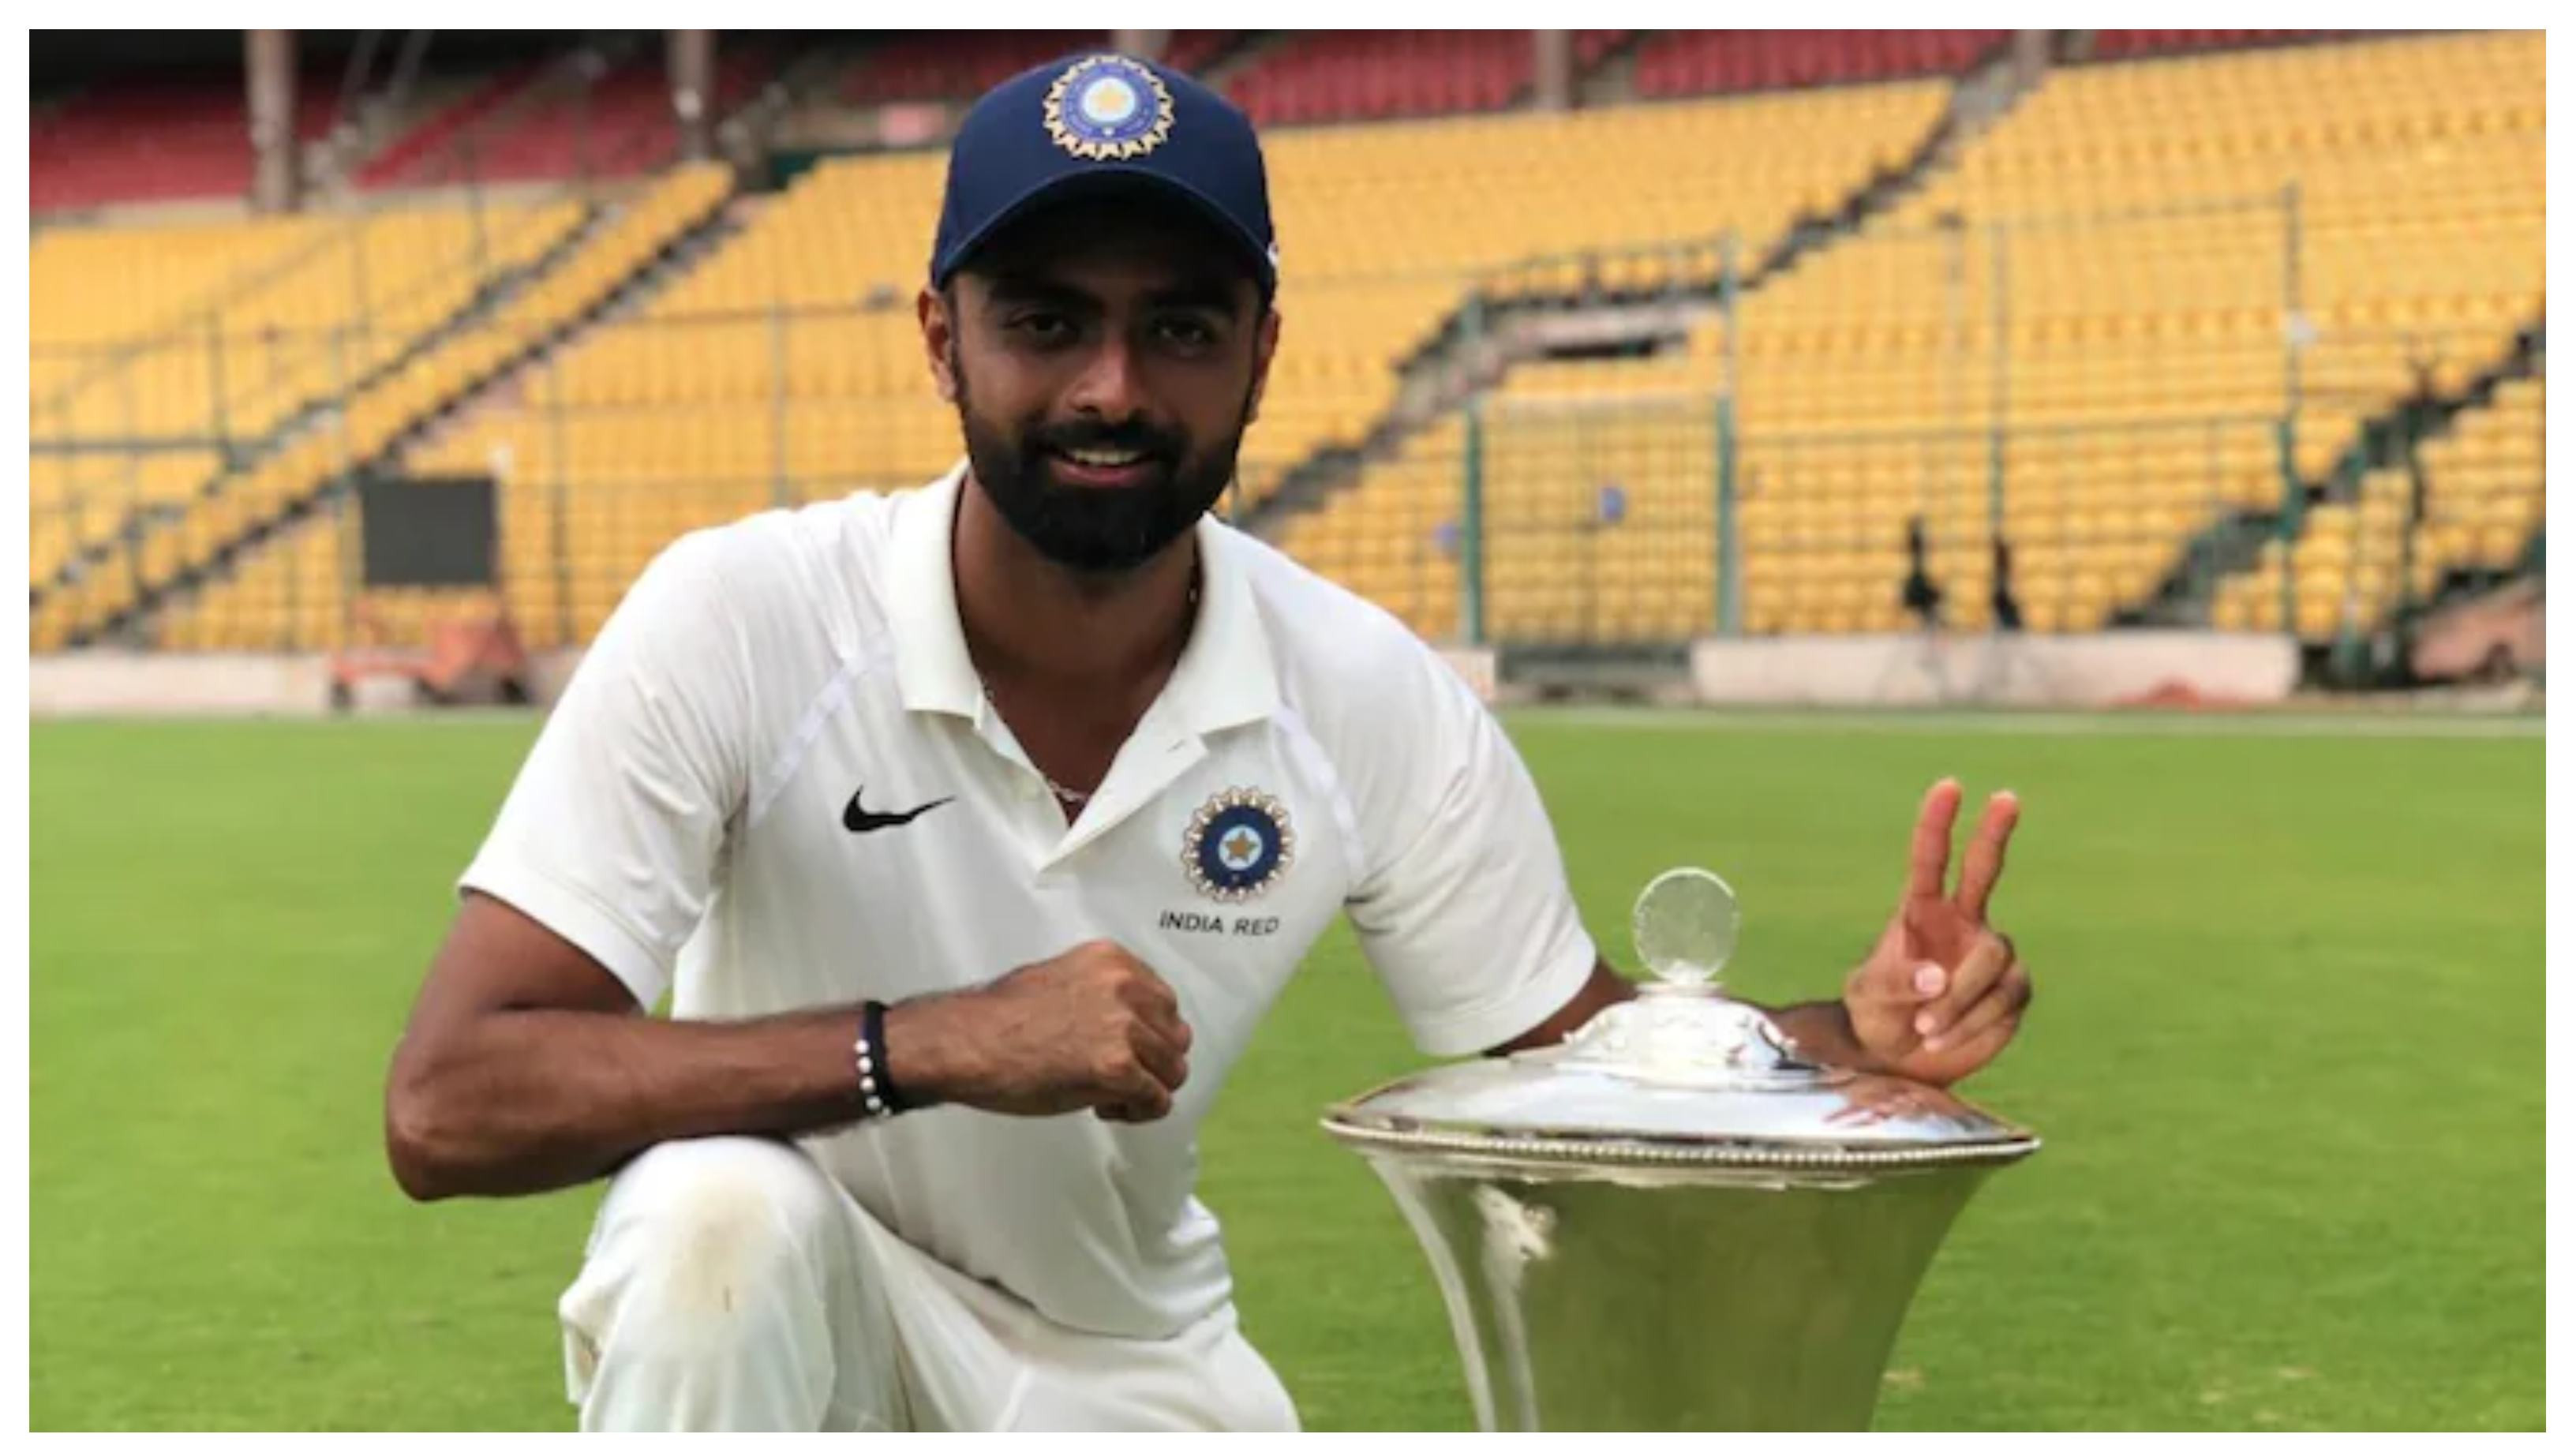 ENG v IND 2021: ‘Honestly disappointed but not frustrated’, Unadkat on selection snub for England tour